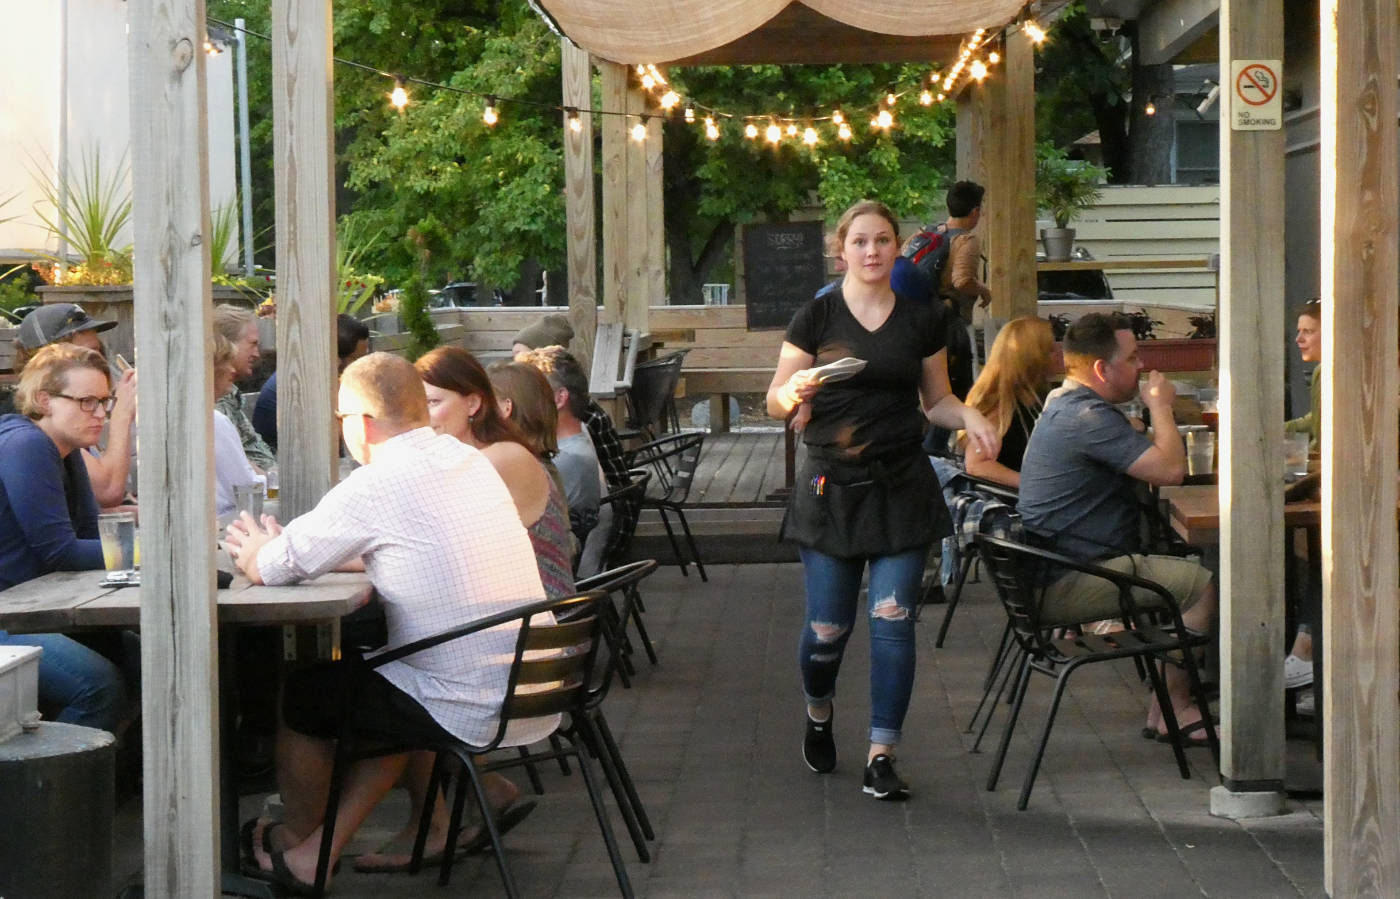 waitress walking forwards between cafe tables with diners, lights overhanging an outdoor patio area with wooden beams surrounding